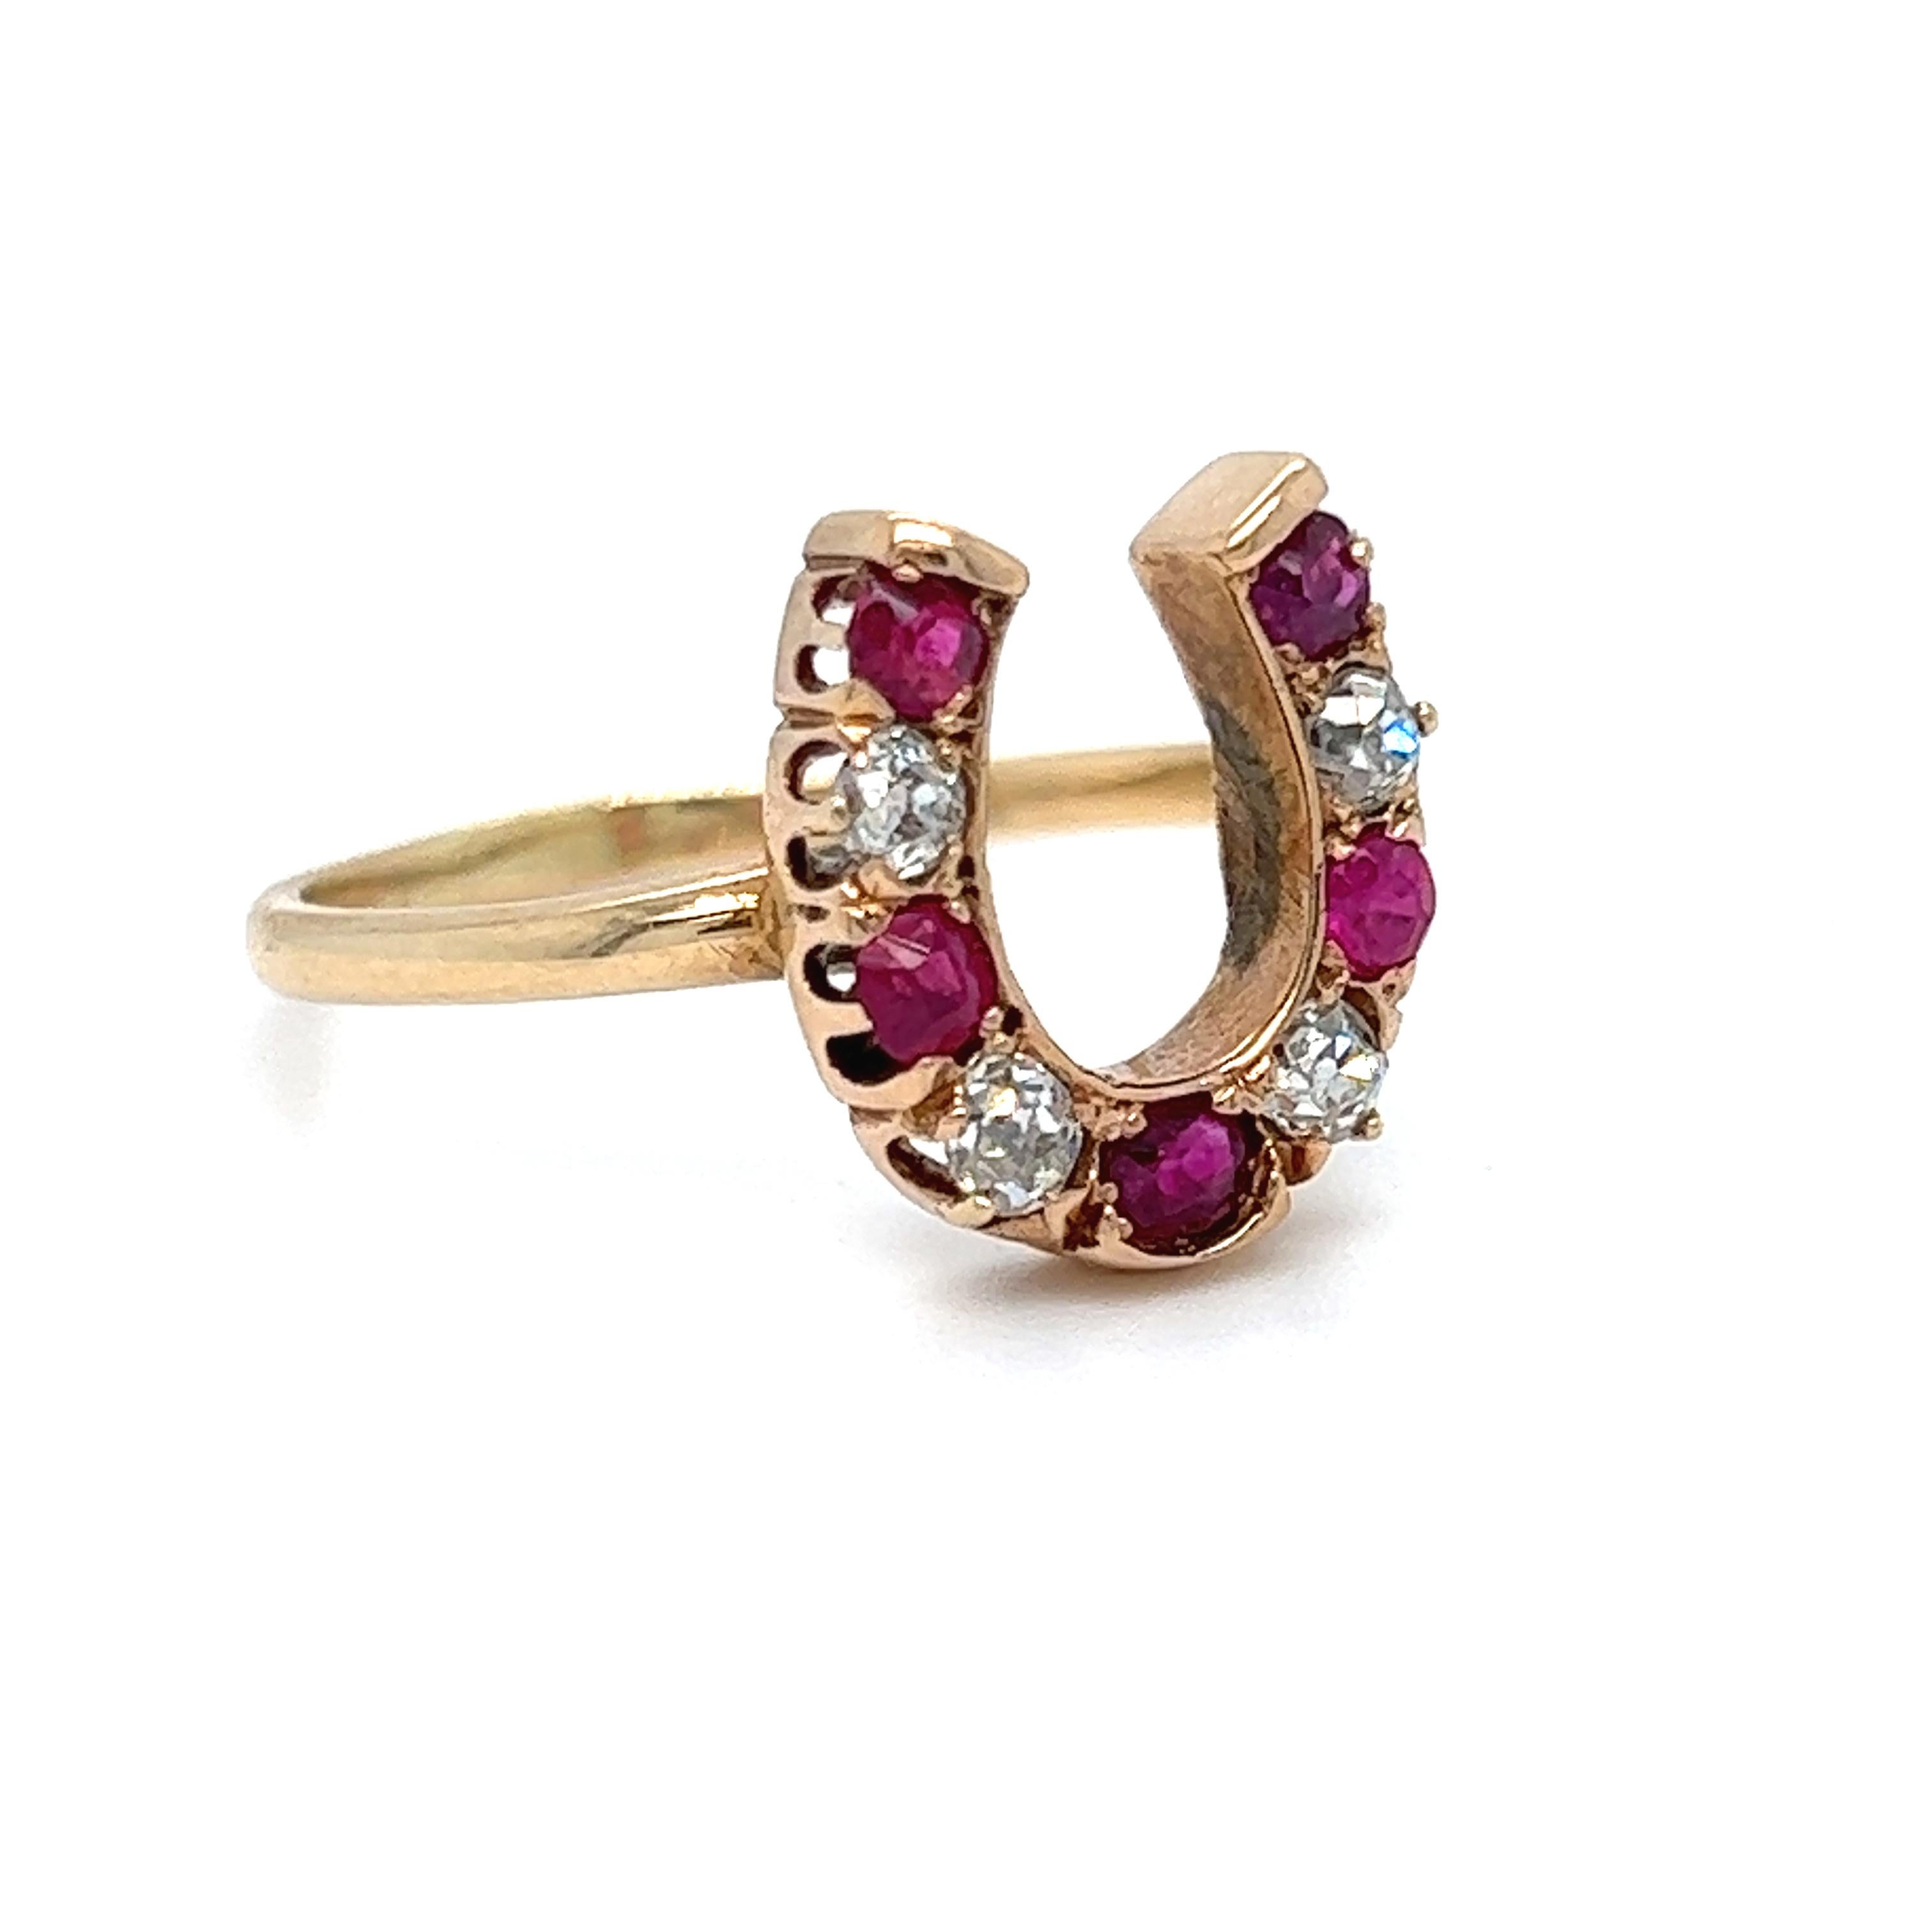 LOVE it! I just know this Vintage Horseshoe Ring is going to bring someone a lot of luck! Crafted in 14K Yellow Gold, and topped in Platinum, the design is a great horseshoe shape, set with alternating natural rubies and diamonds. There are a total